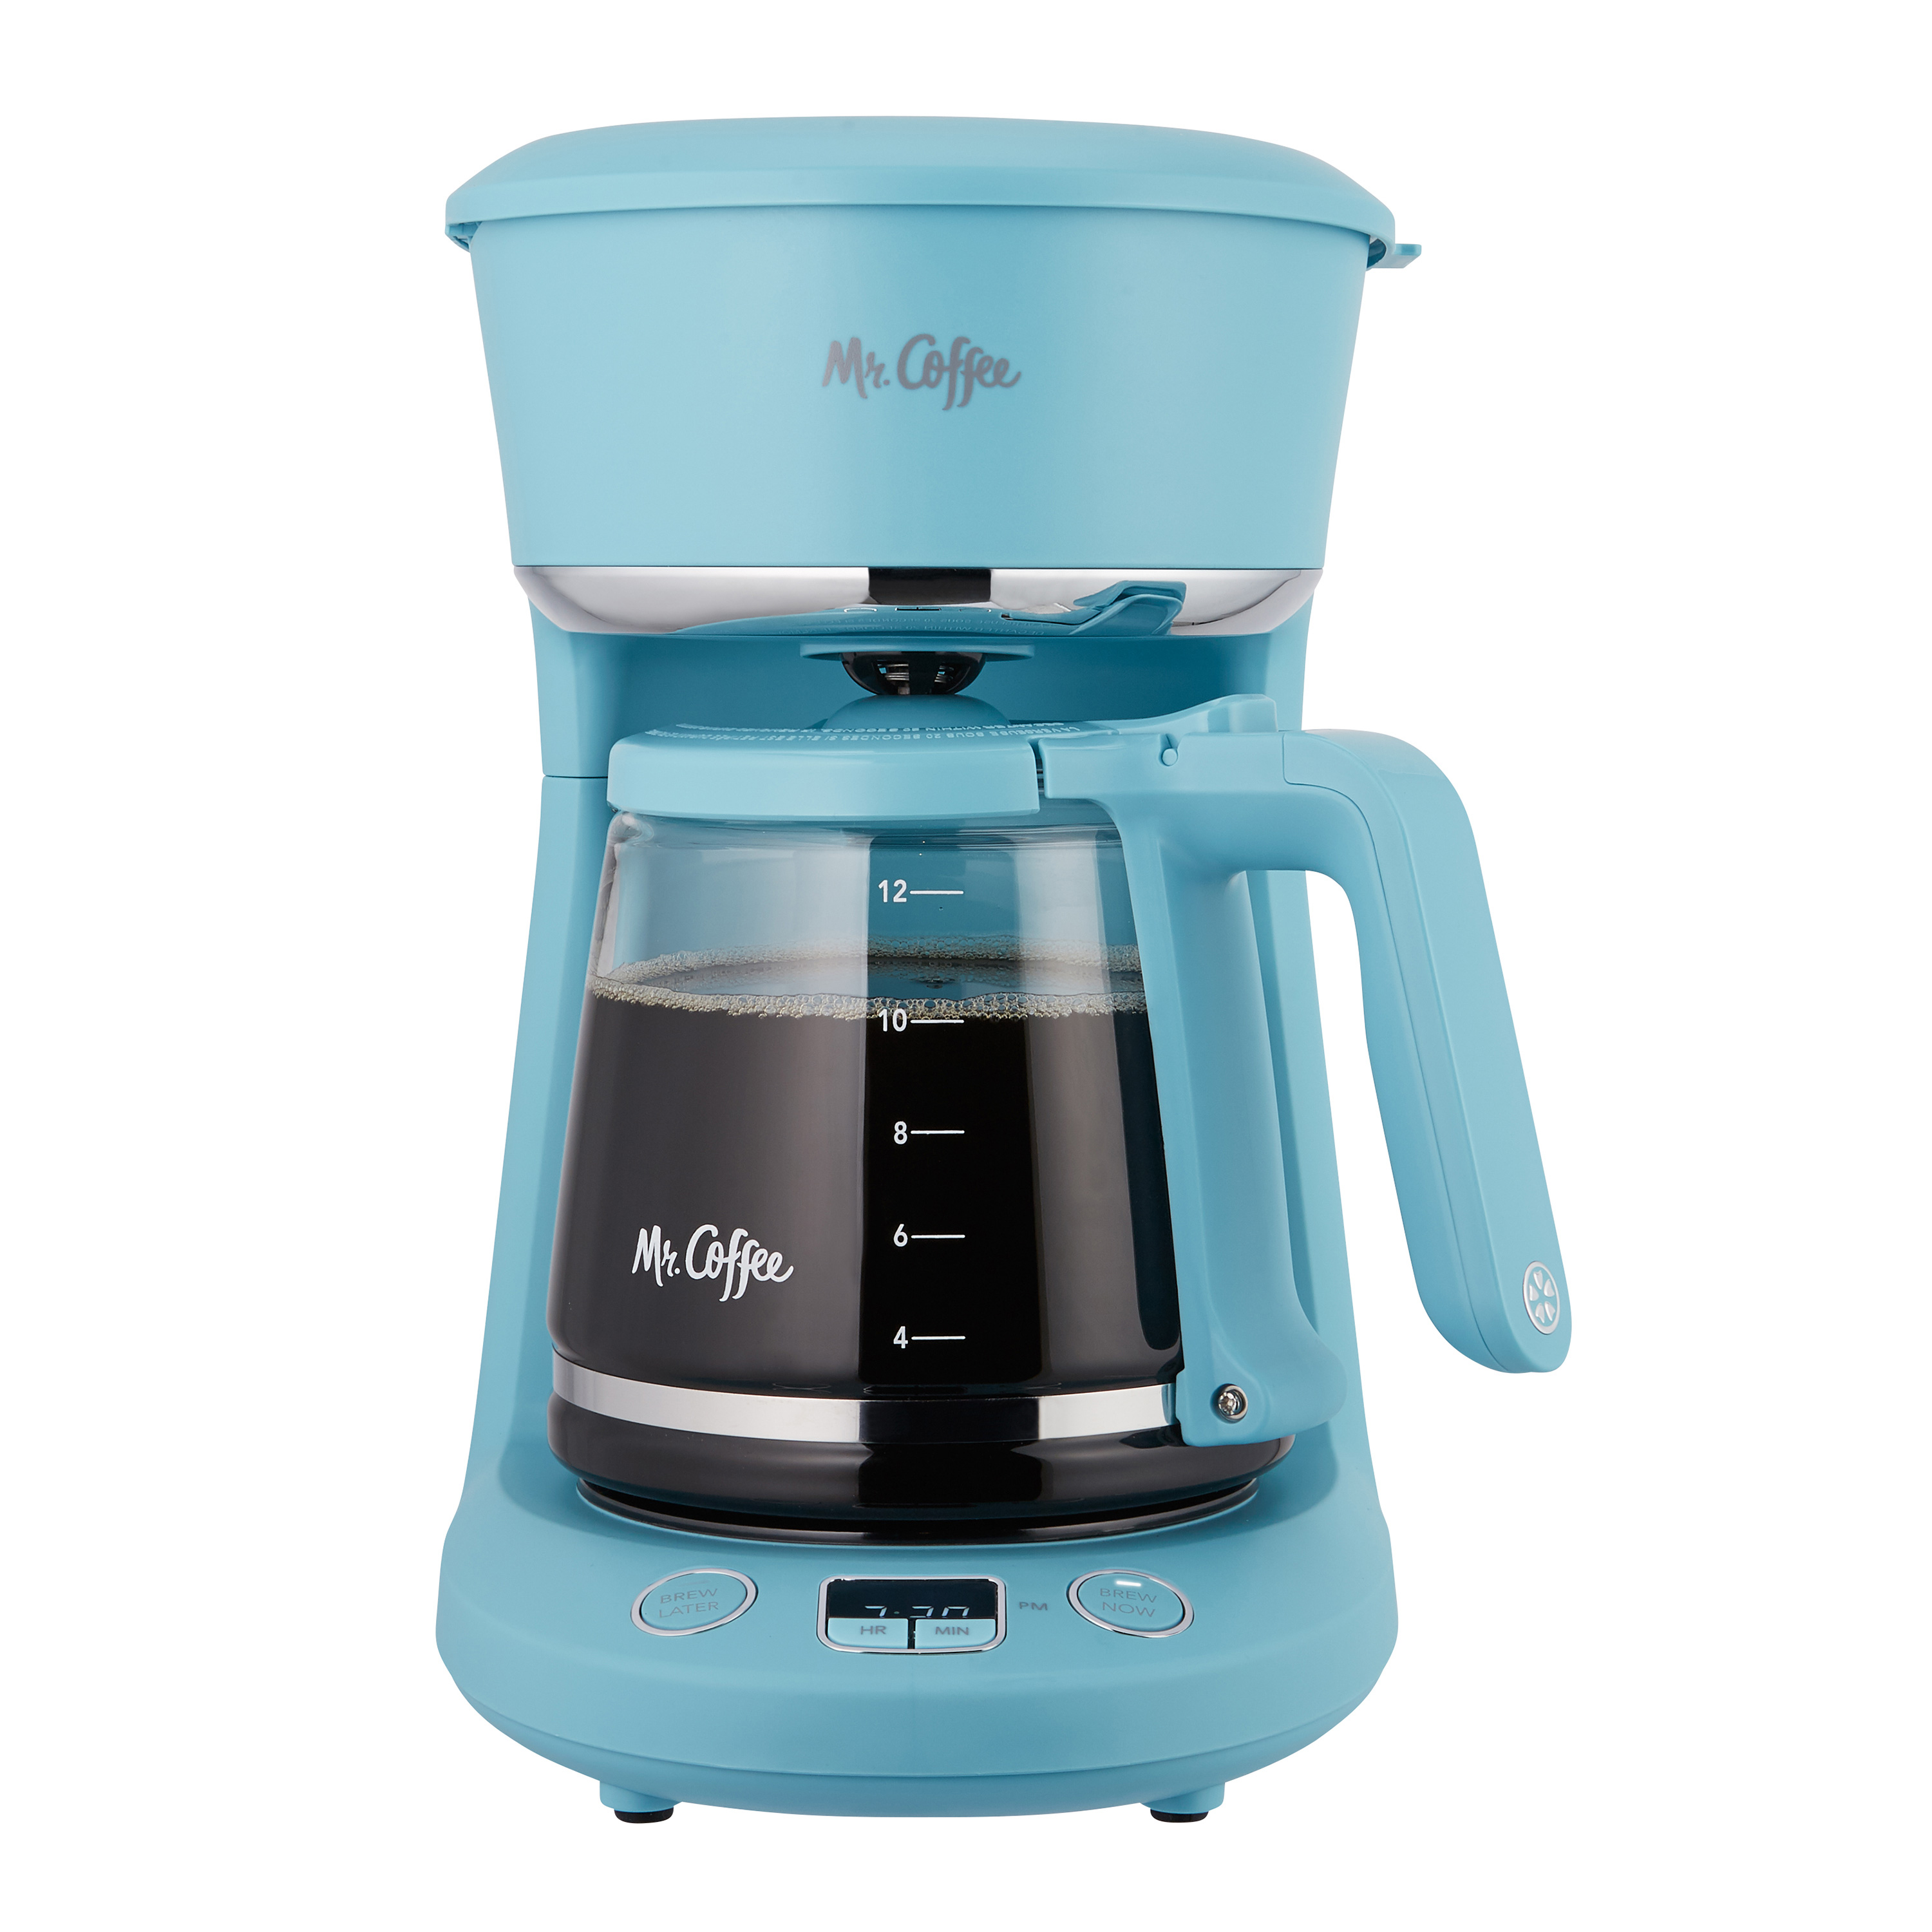 Mr. Coffee 12-Cup Programmable Coffeemaker, Arctic Blue, Brew Now or Later - image 3 of 5